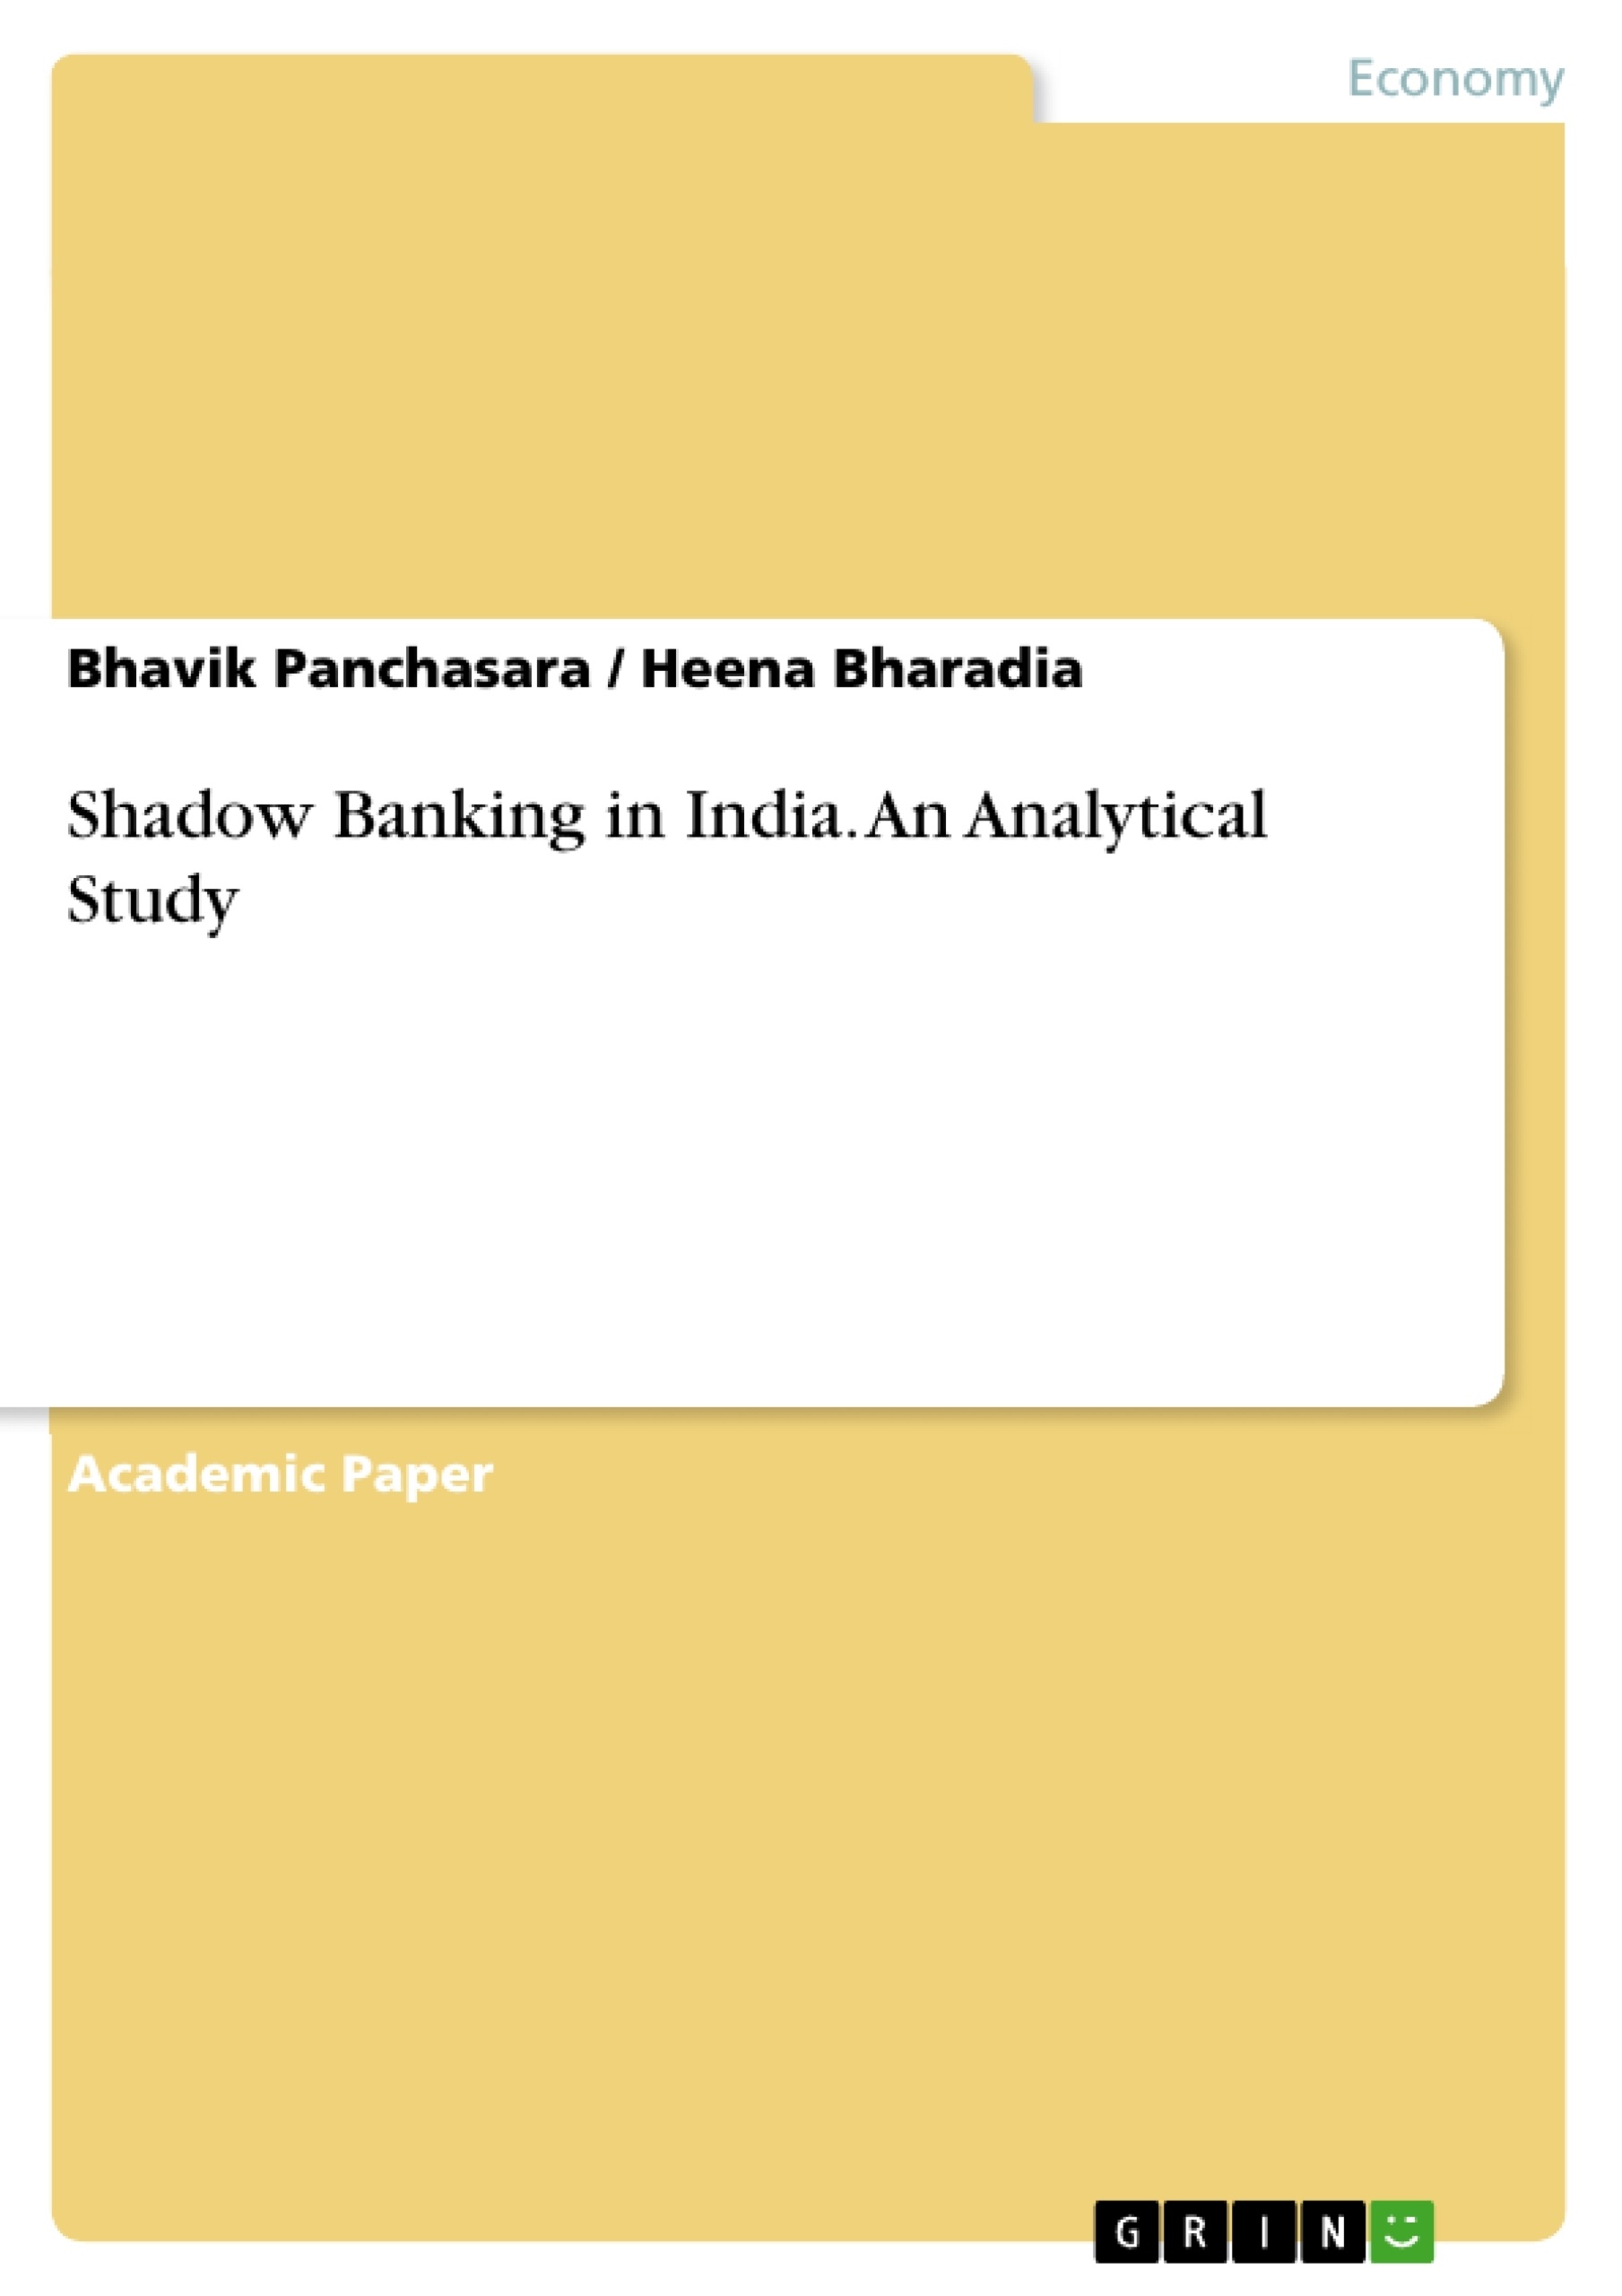 Title: Shadow Banking in India. An Analytical Study